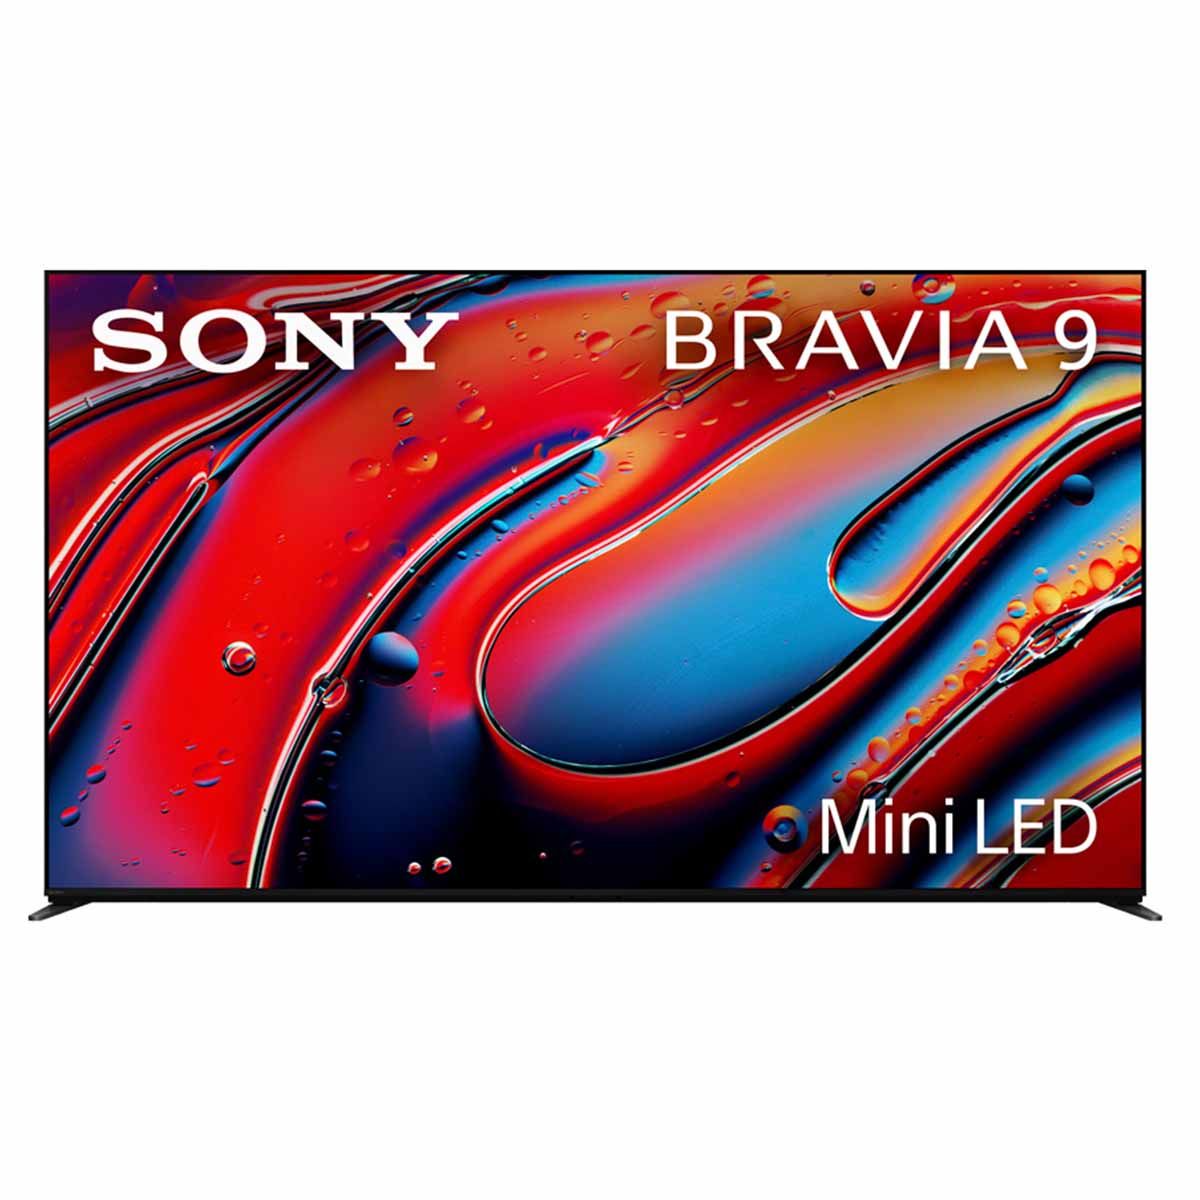 Sony BRAVIA 9 Mini LED QLED 4K HDR Google TV (2024) - front view with Sony text